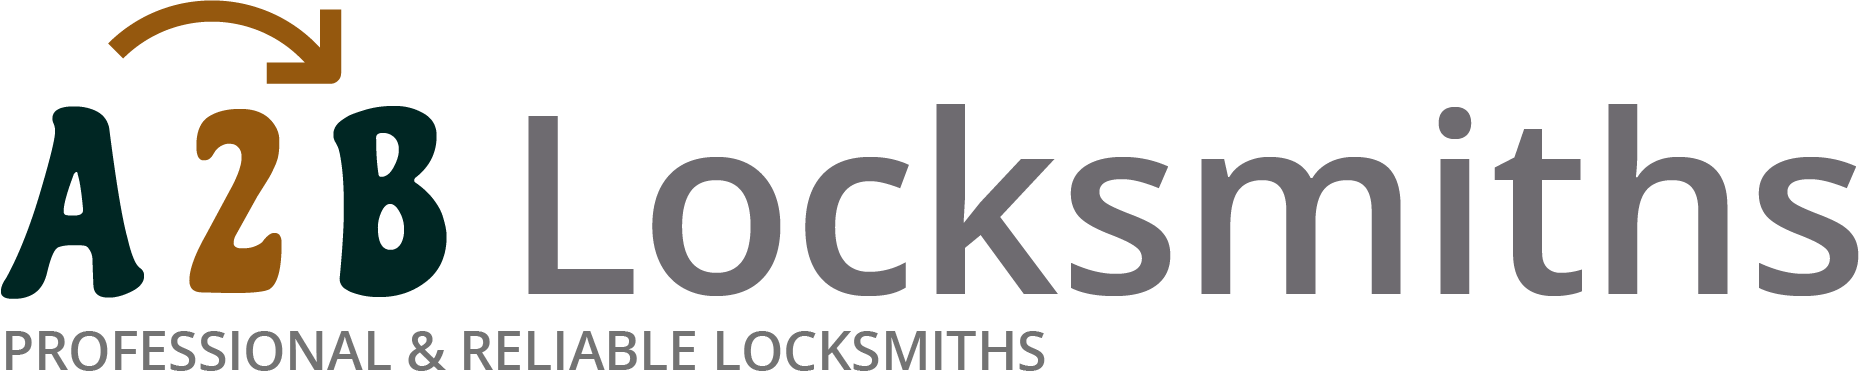 If you are locked out of house in Arbroath, our 24/7 local emergency locksmith services can help you.